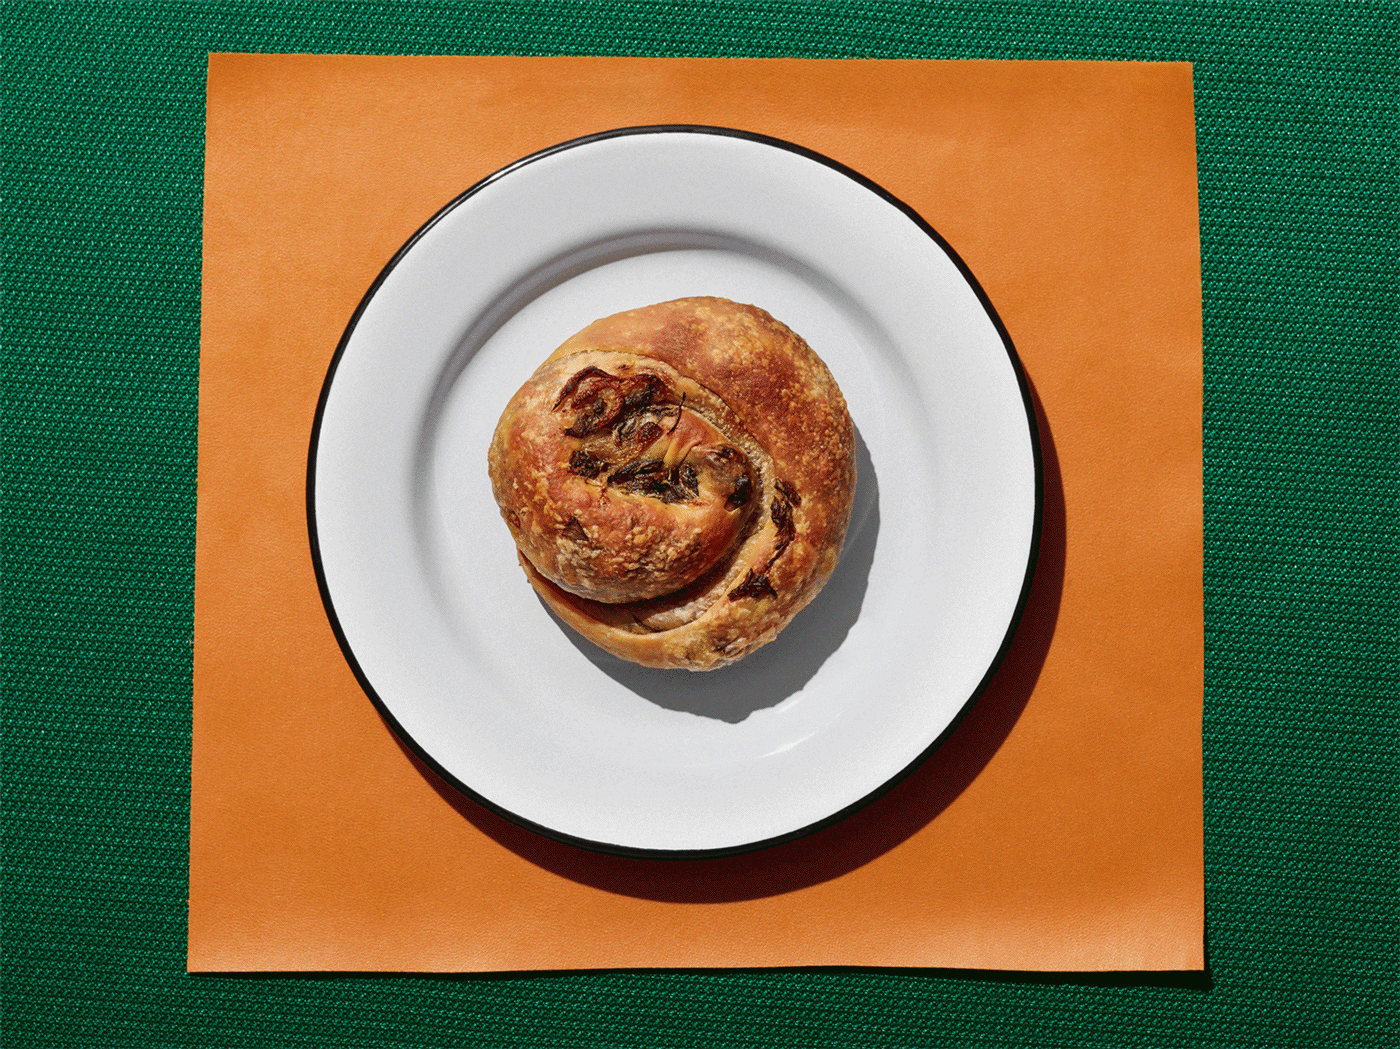 Boyos, a savory Sephardi pastry, on a white plate atop orange and green background